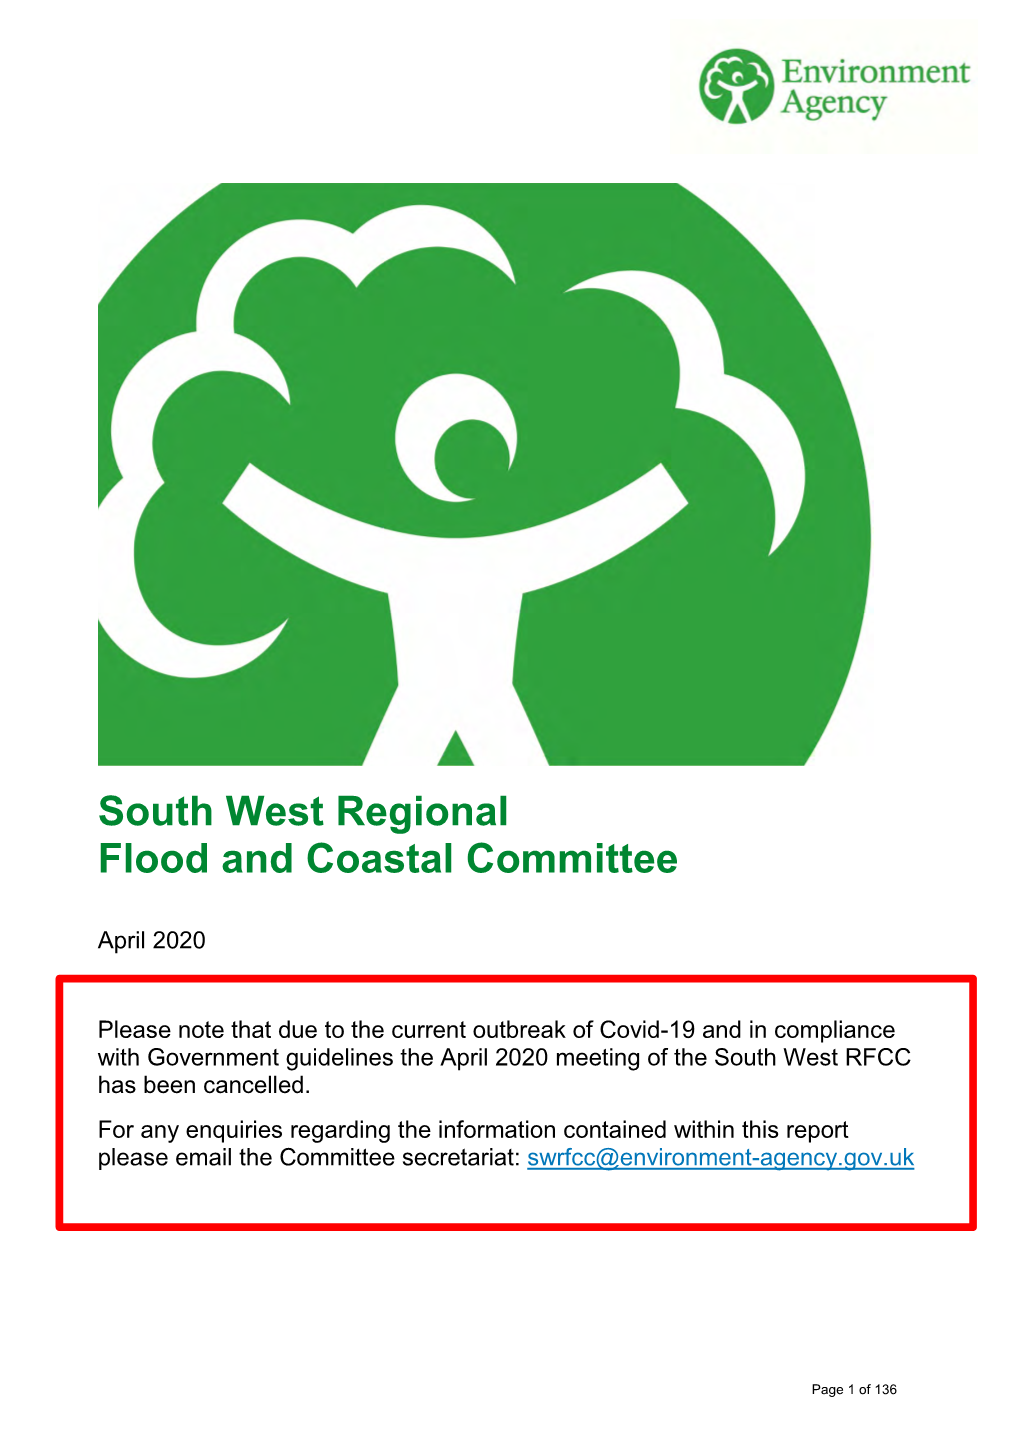 South West Regional Flood and Coastal Committee